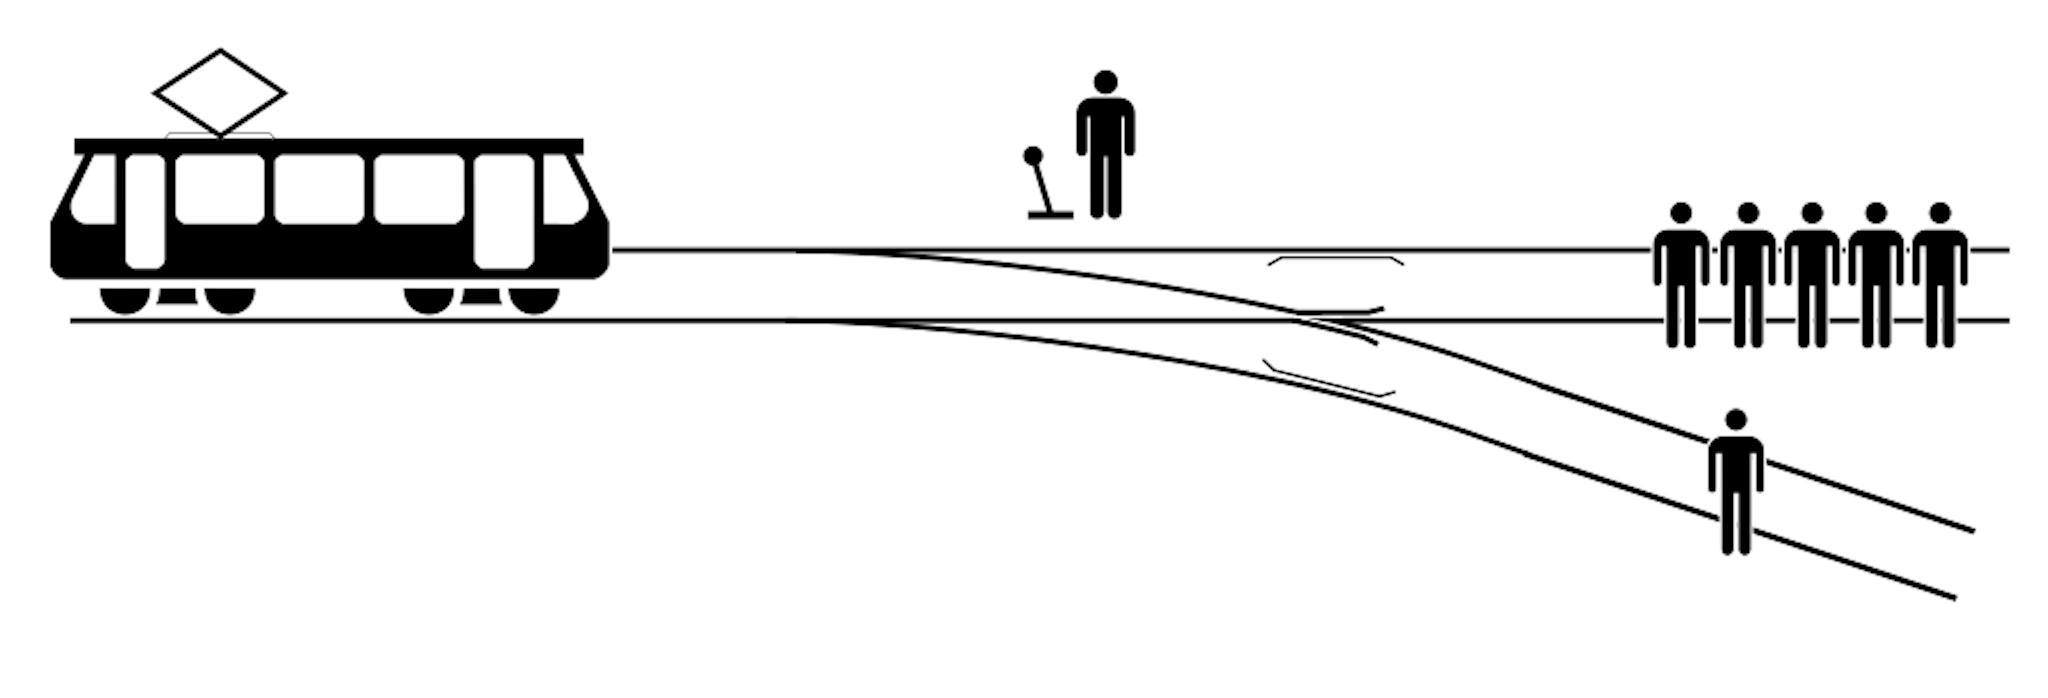 An illustration of the trolley problem. By McGeddon / CC BY-SA 4.0